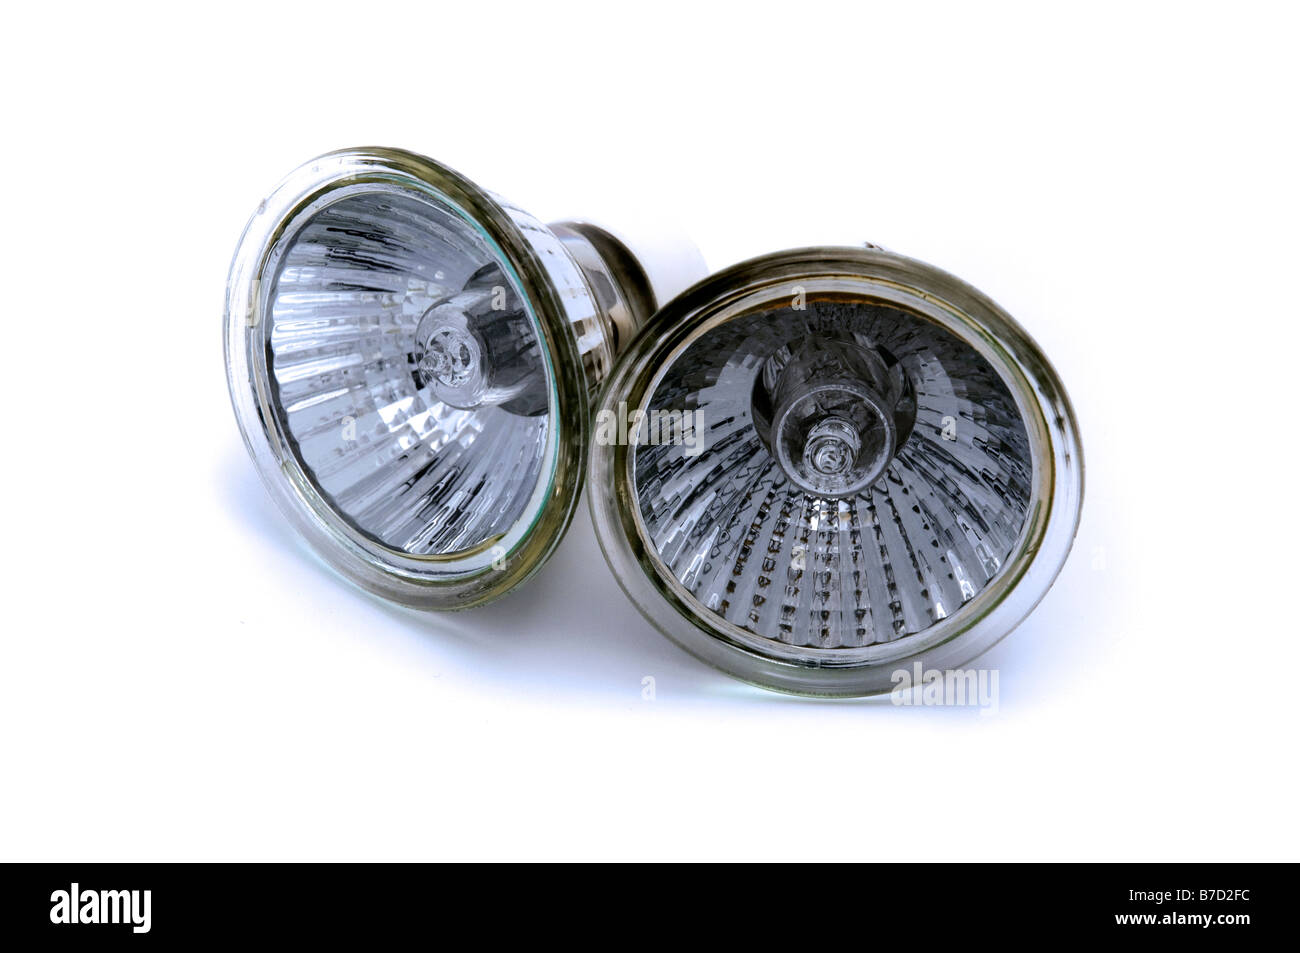 Halogen reflector lamp on a white background Stock Photo